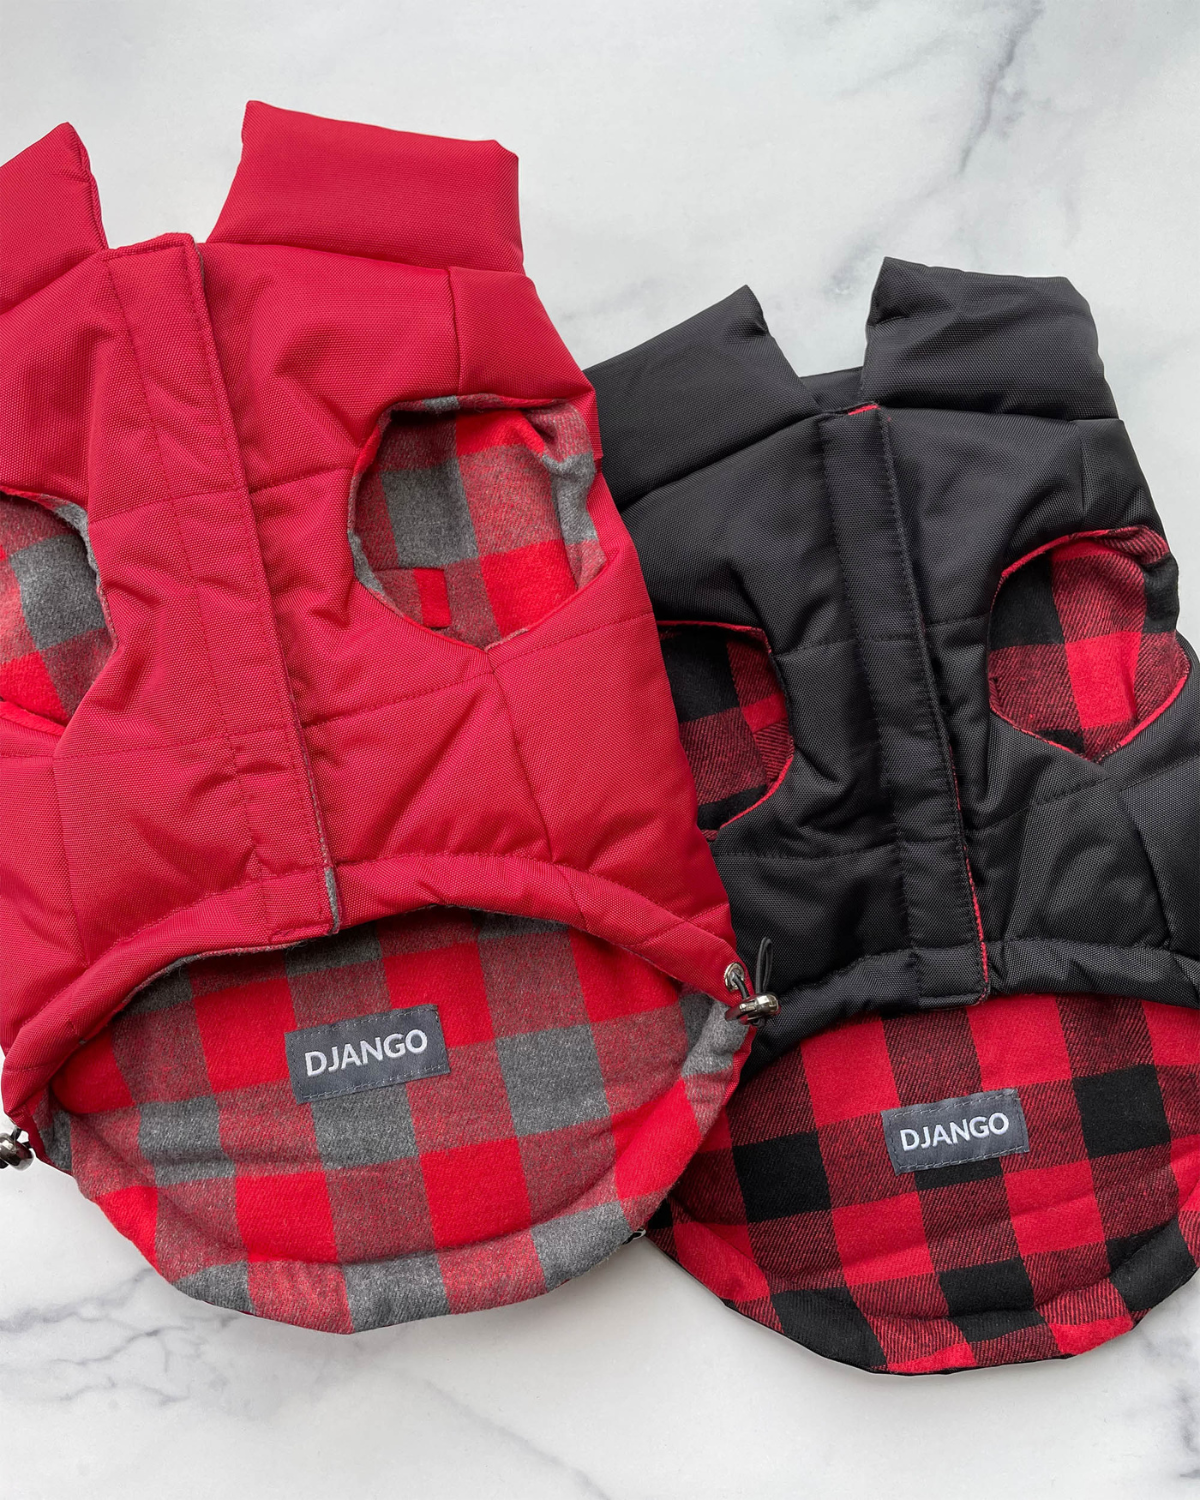 DJANGO's Reversible Puffer features a super cozy interior lining that can be worn facing outwards. Dog and their hoomans love the oversized armholes, adjustable hem, and spacious and easy-access leash portal - djangobrand.com